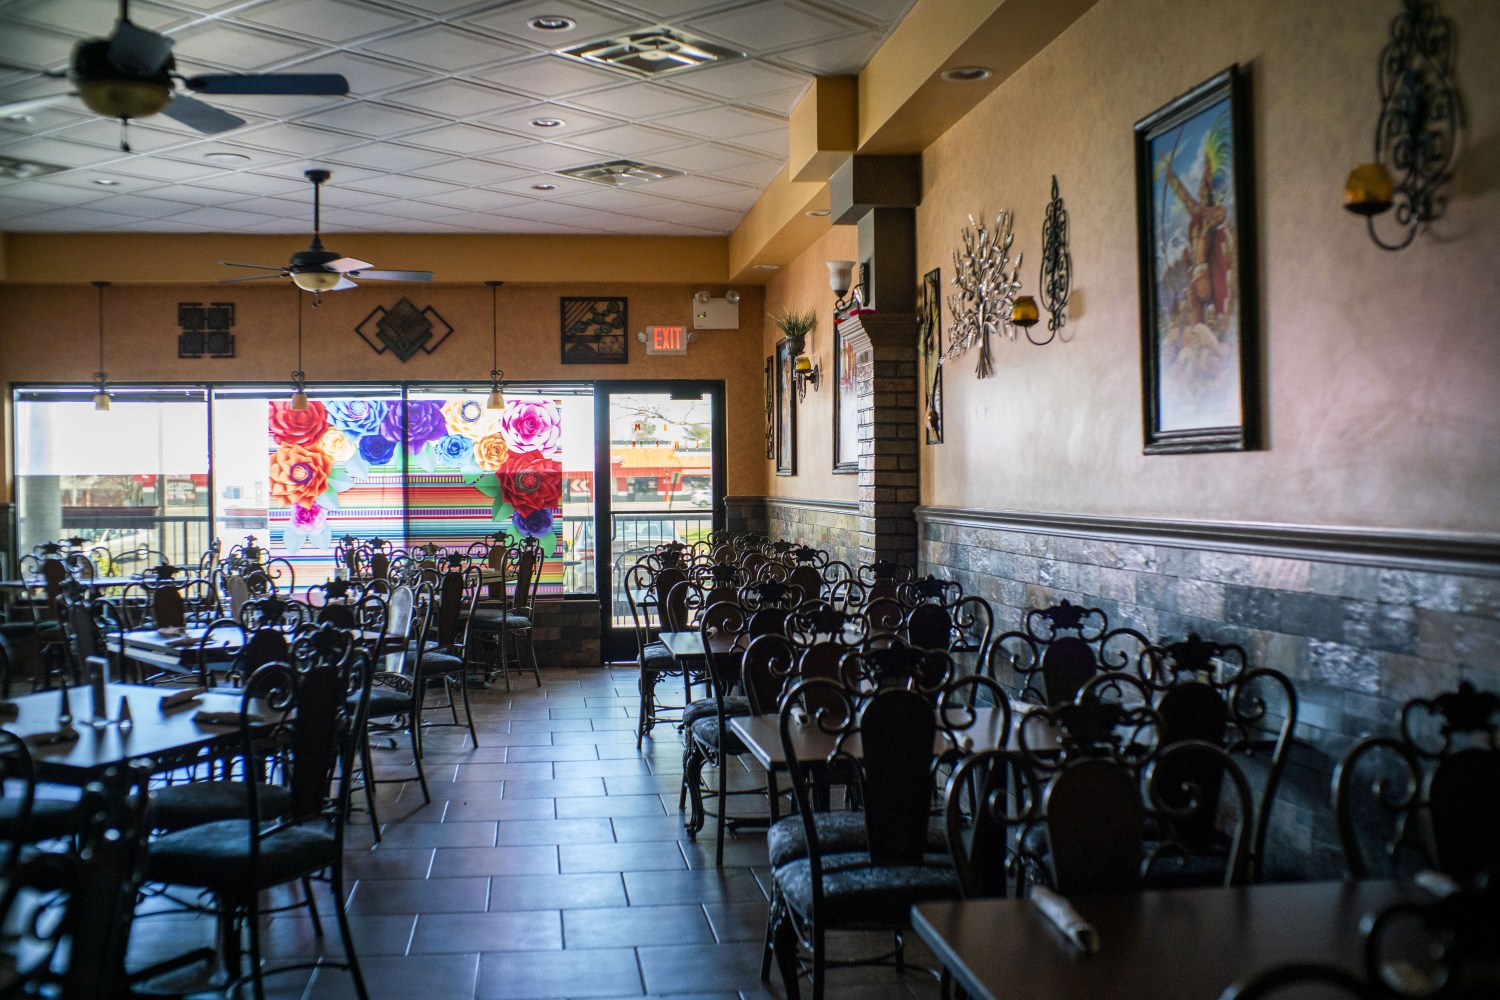 FILE PHOTO: A local restaurant is seen empty due to the outbreak of the coronavirus disease (COVID-19) in Matawan, New Jersey, U.S., April 1, 2020. REUTERS/Eduardo Munoz/File Photo